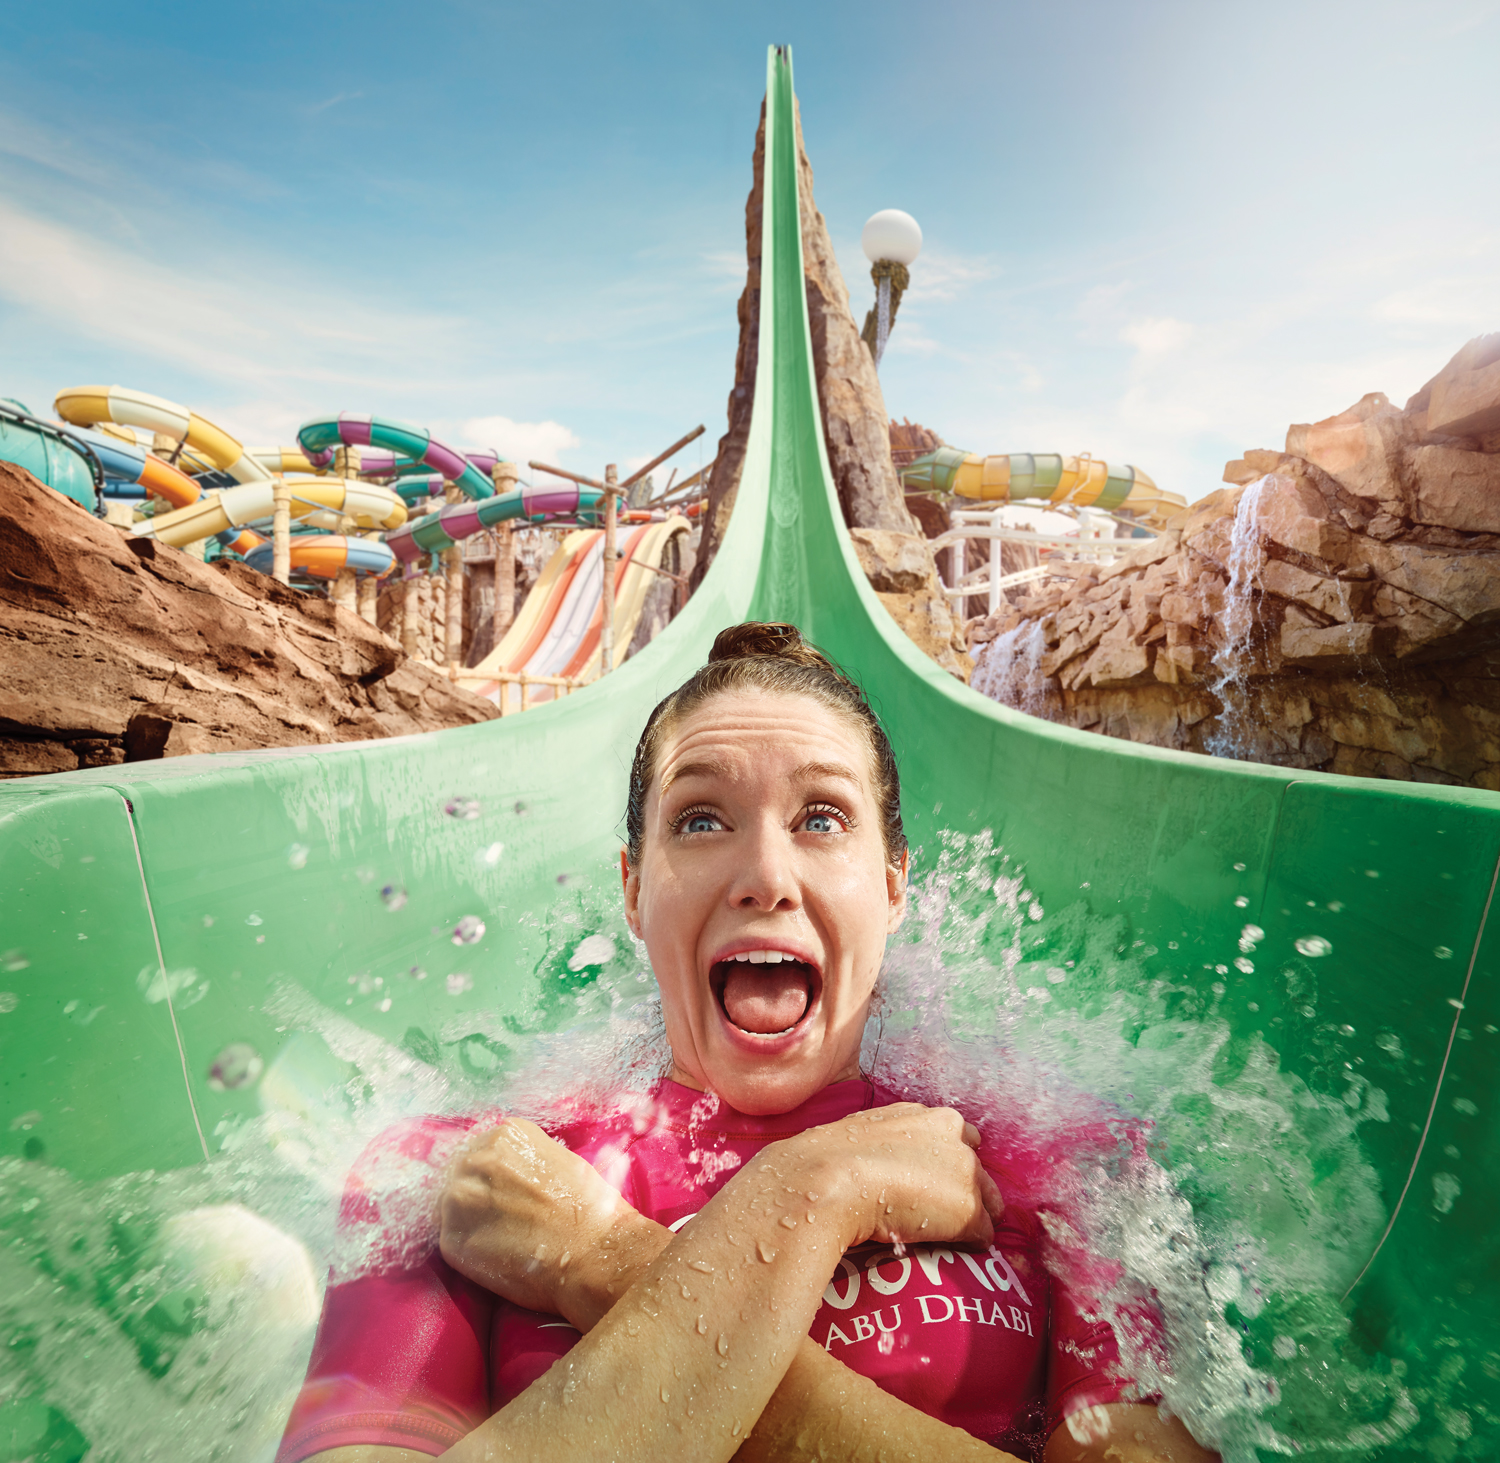 Dare to let go at Jebel Drop in Yas Water World